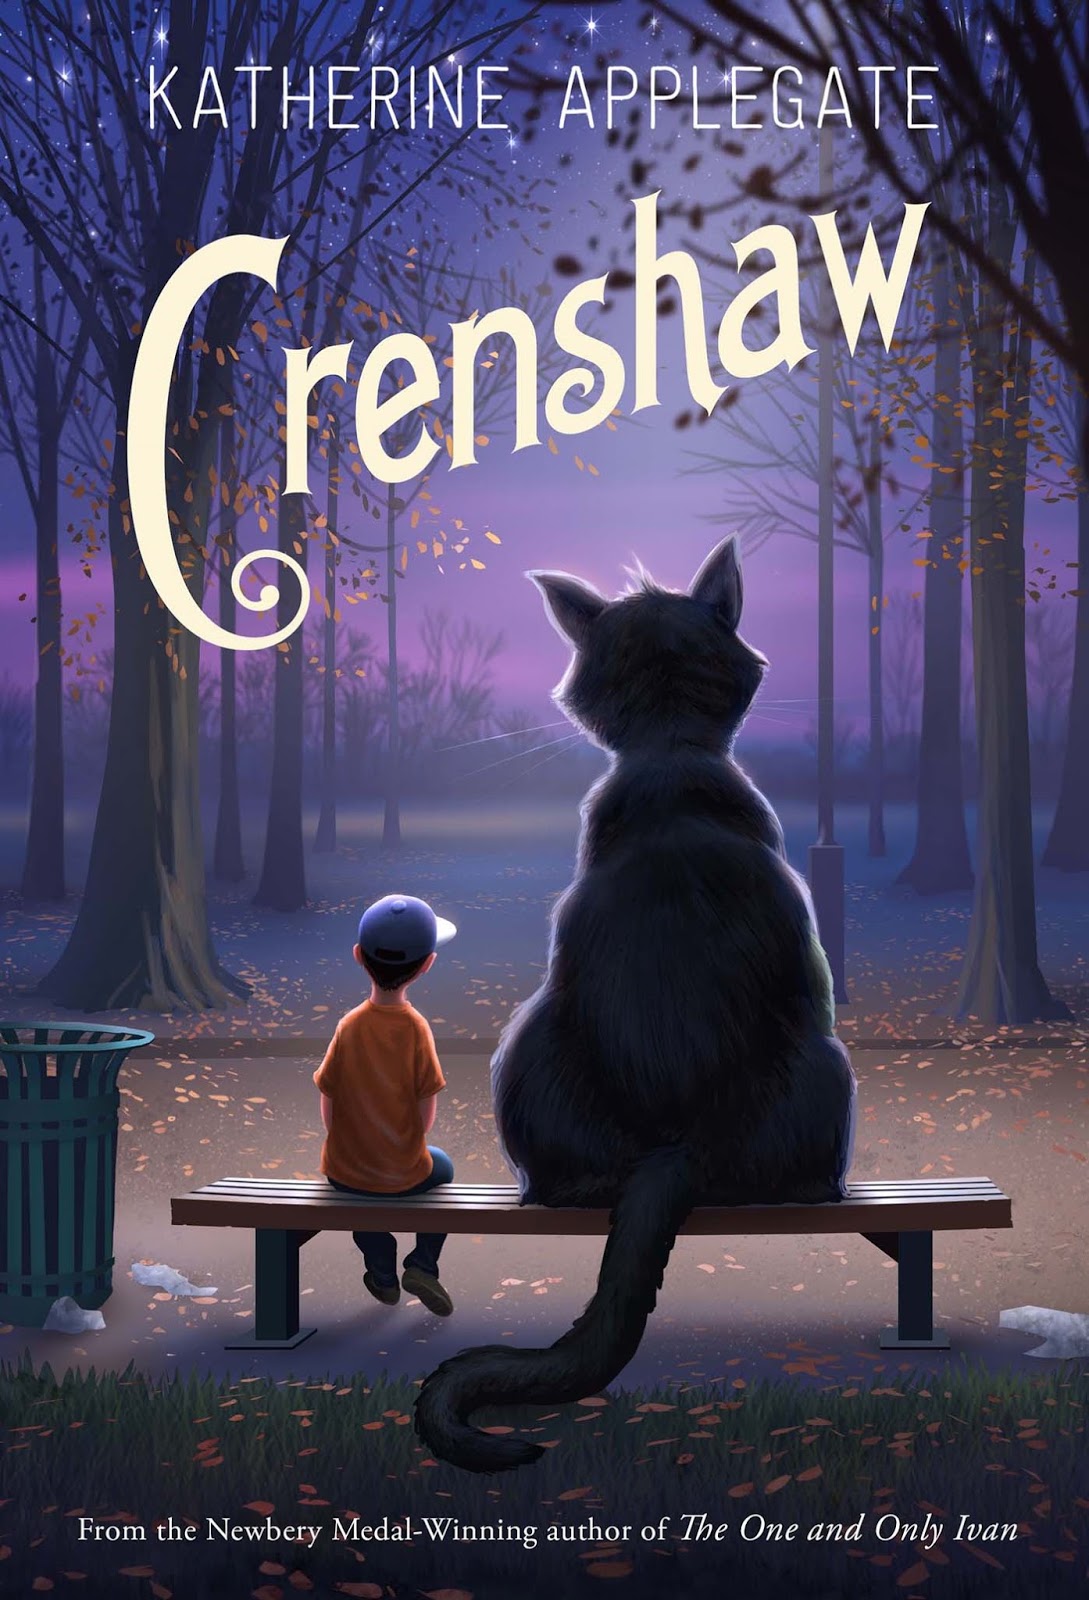 Image result for Crenshaw book cover.